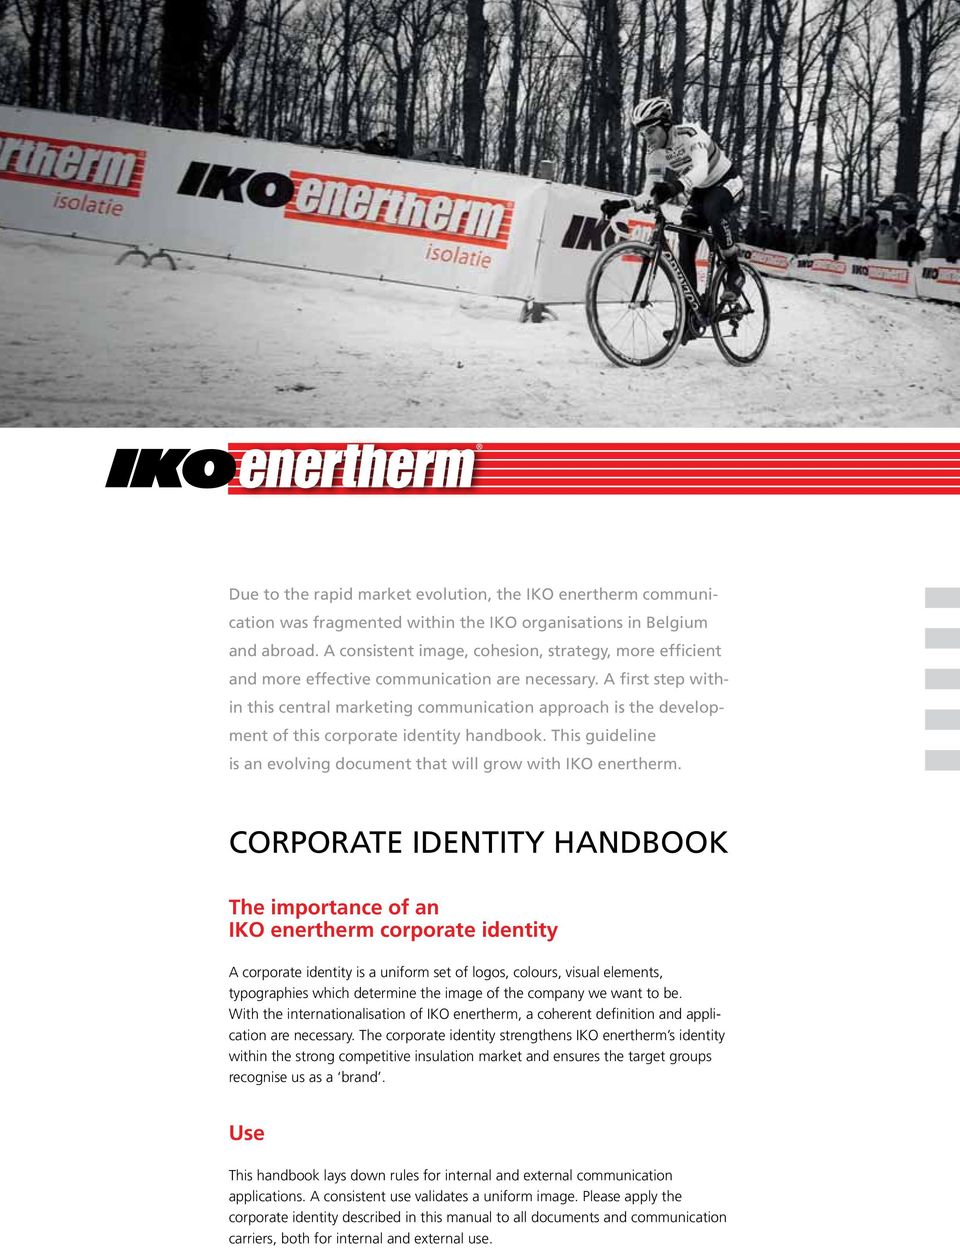 A first step within this central marketing communication approach is the development of this corporate identity handbook. This guideline is an evolving document that will grow with IKO enertherm.